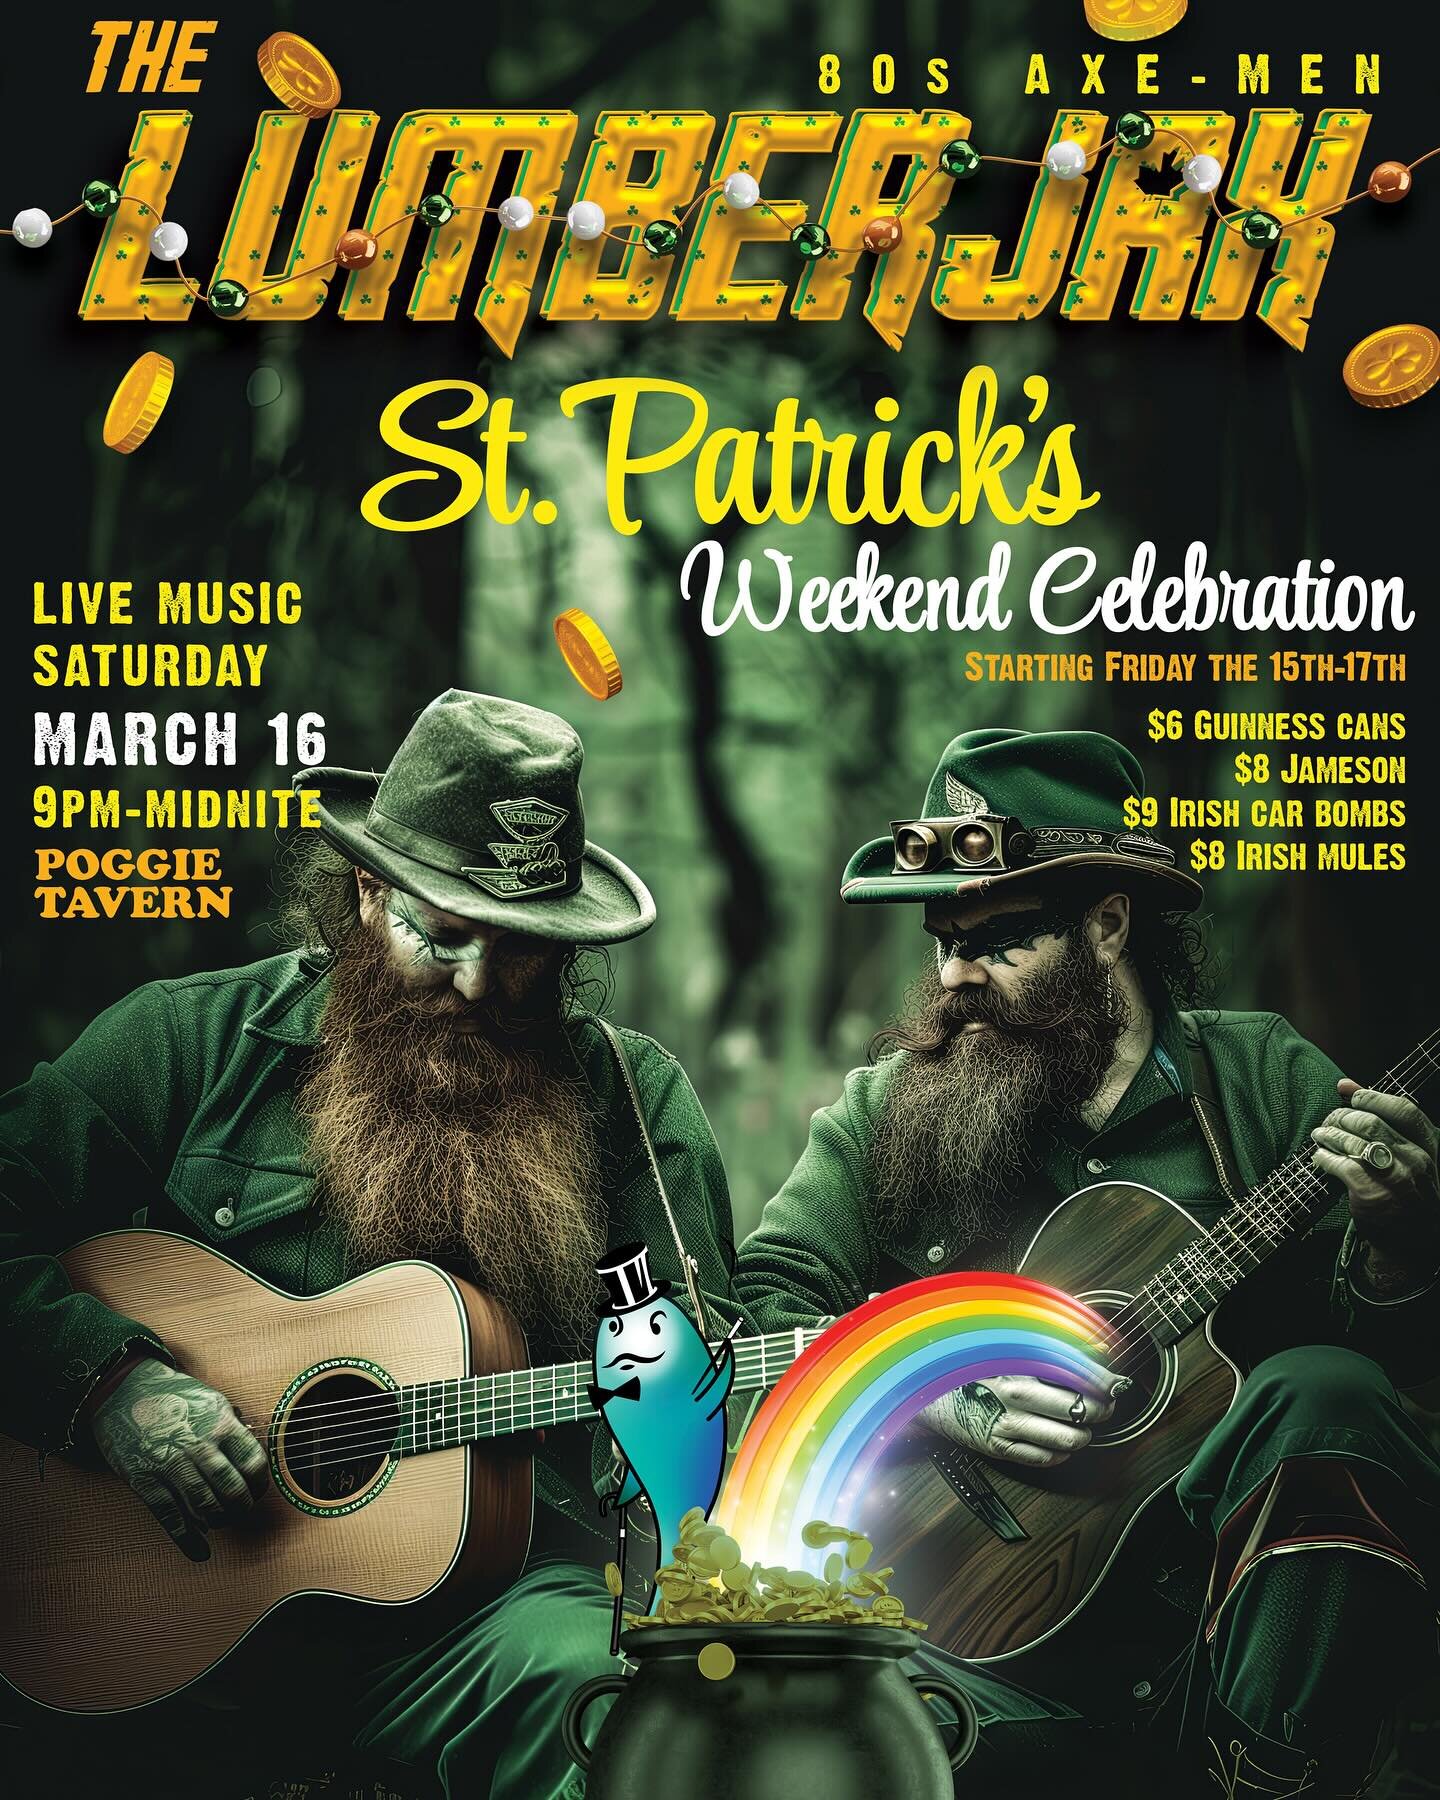 A little Lumberjax prefunk Patty&rsquo;s day weekend! Join us for $8 Jameson, $6 Guinness, $9 car bombs and $8 Irish mules.  And of course on Saturday, lumberjack hotties!!